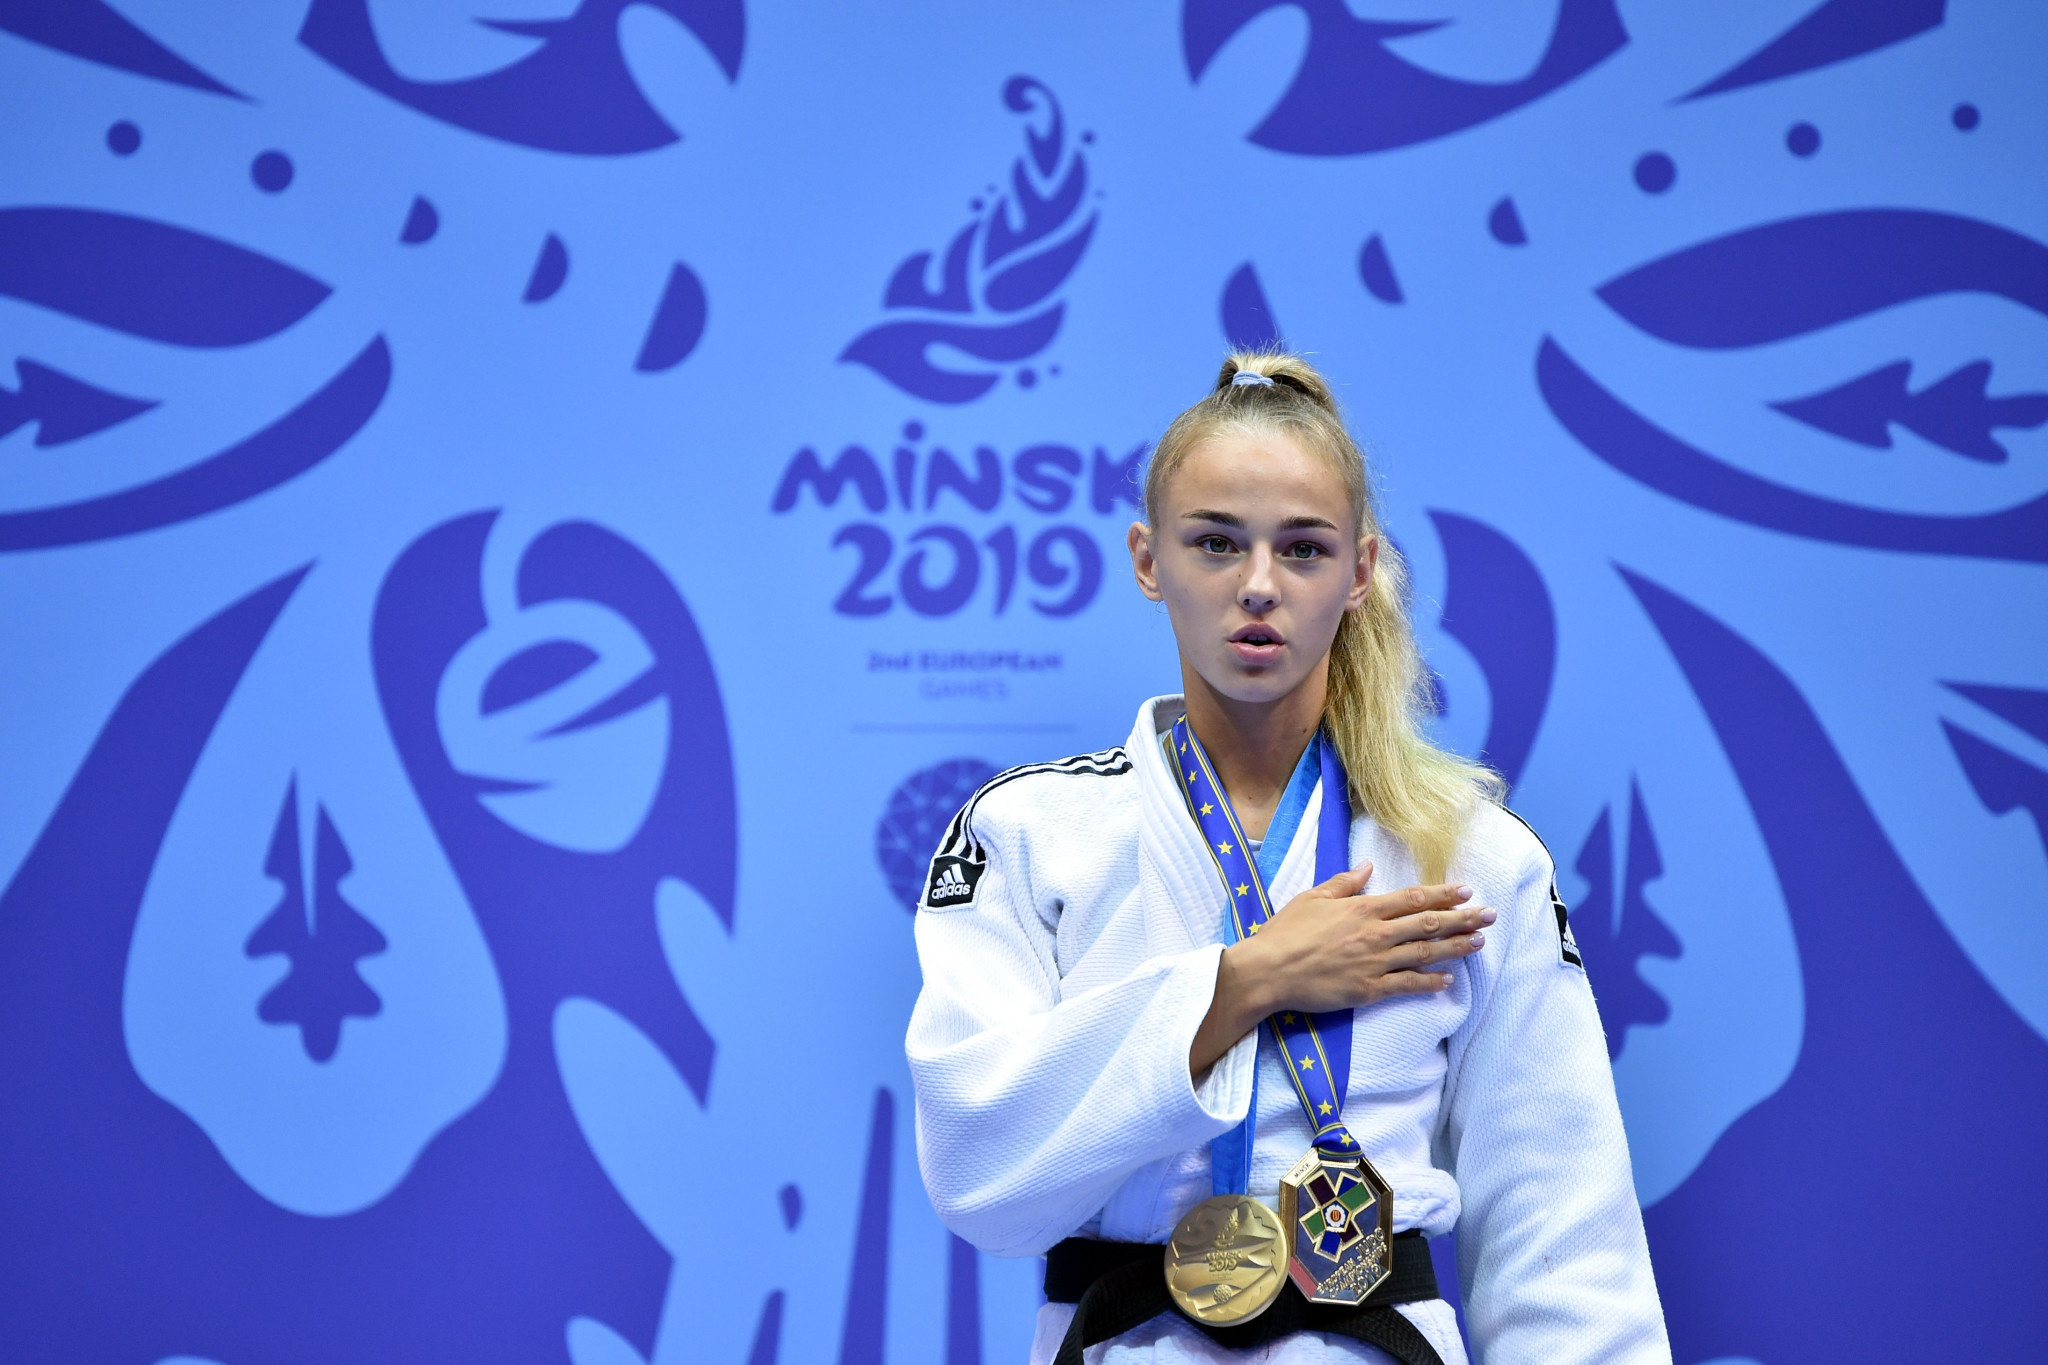  Bilodid beats rival Dolgova and Kosovo win two golds on day one of judo at Minsk 2019 European Games